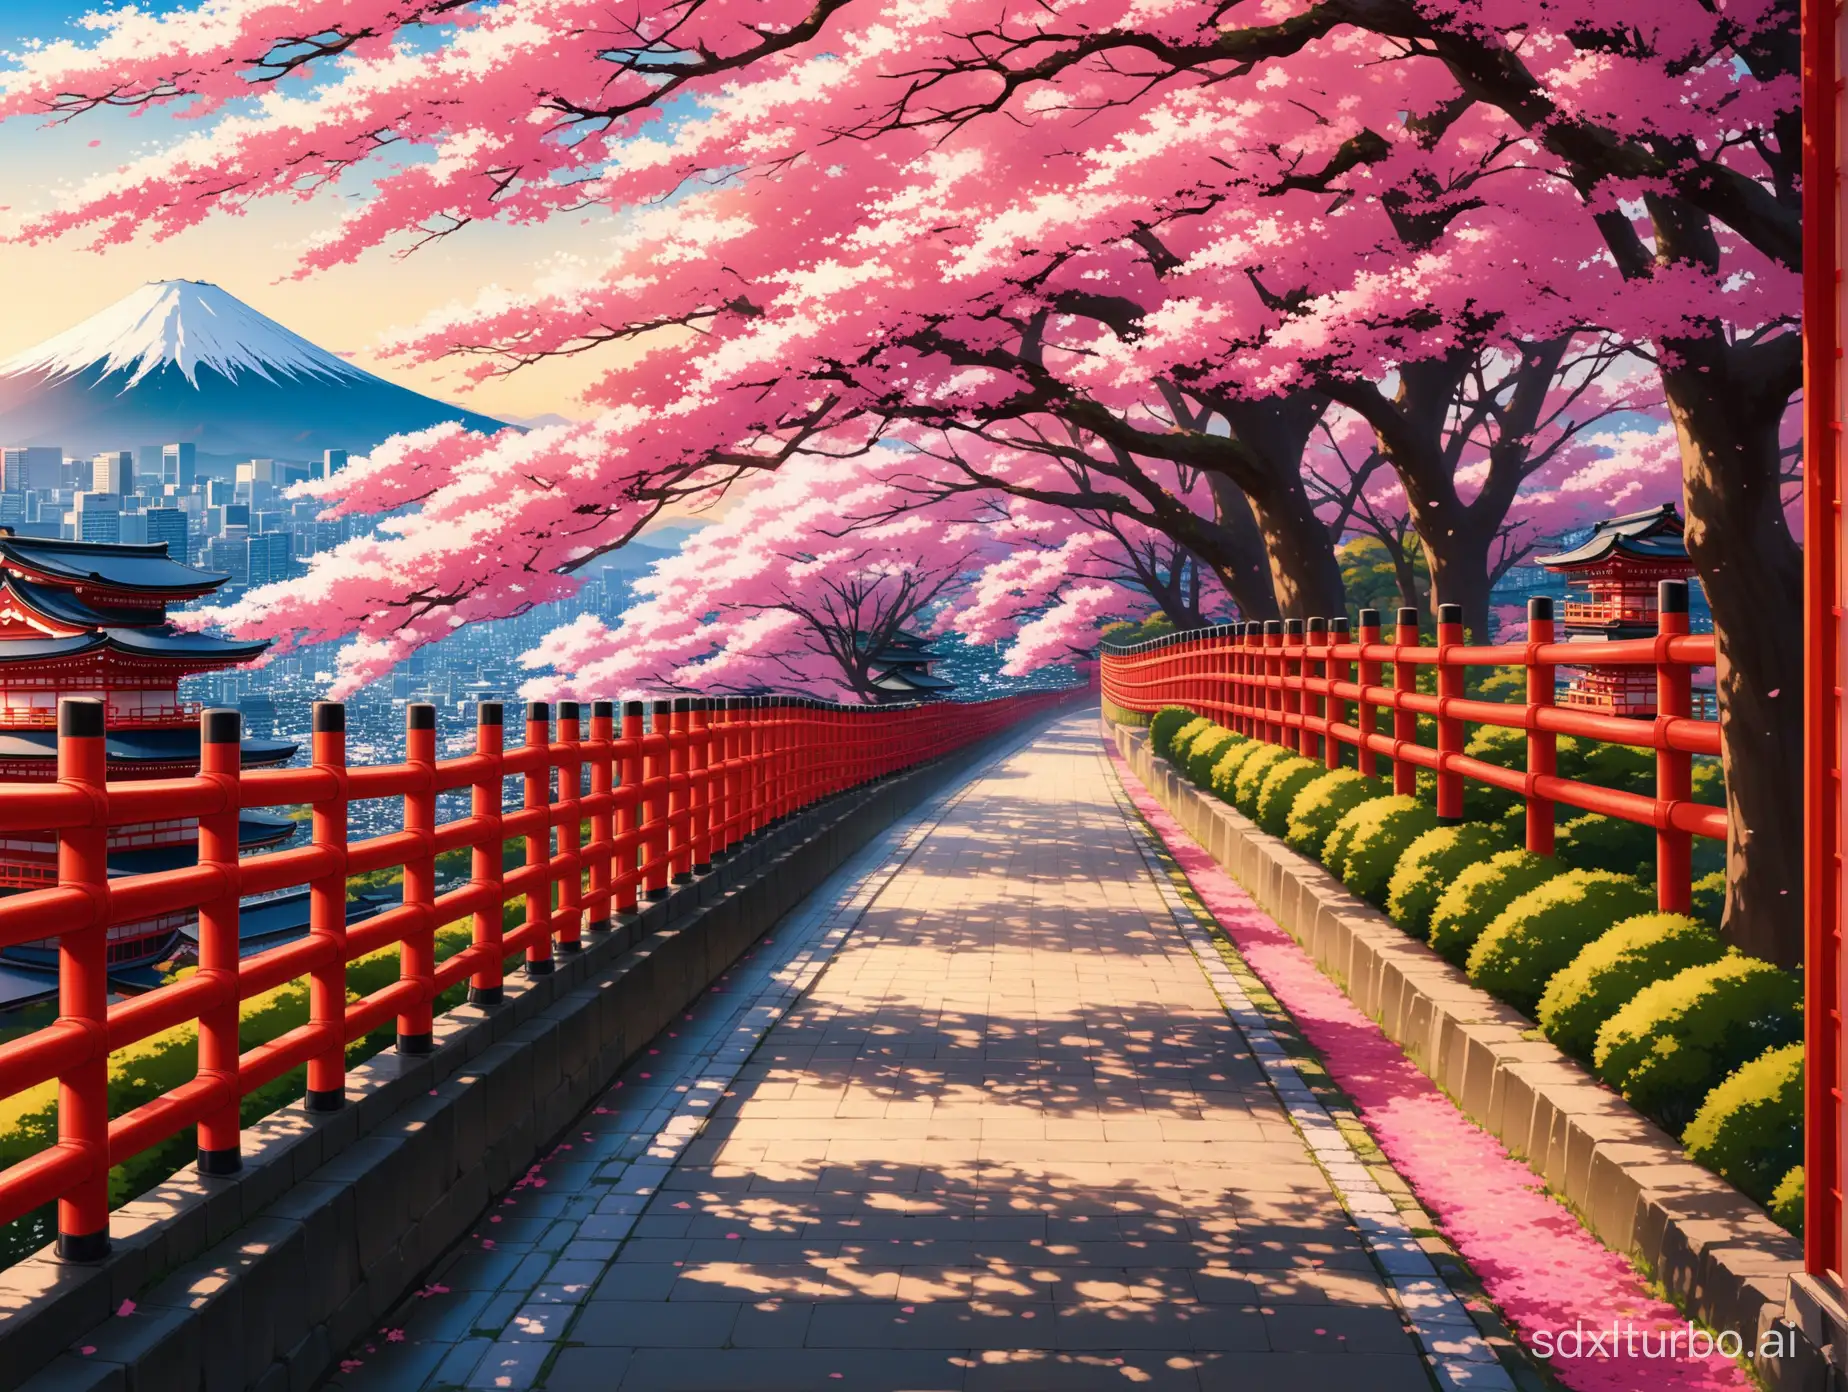 Enchanting-Journey-through-Japan-Cherry-Blossoms-and-Ancient-Temples